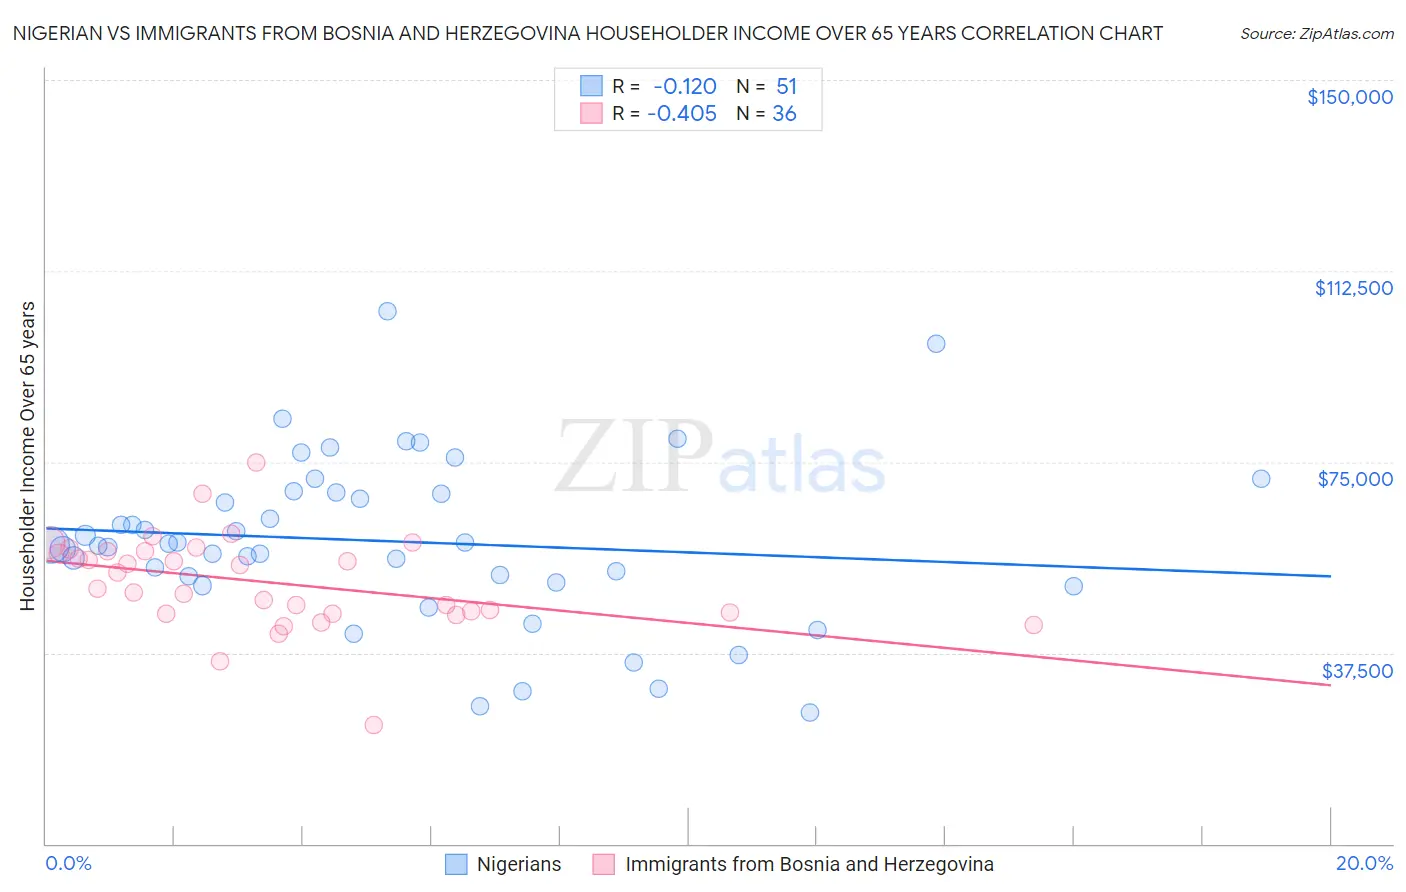 Nigerian vs Immigrants from Bosnia and Herzegovina Householder Income Over 65 years